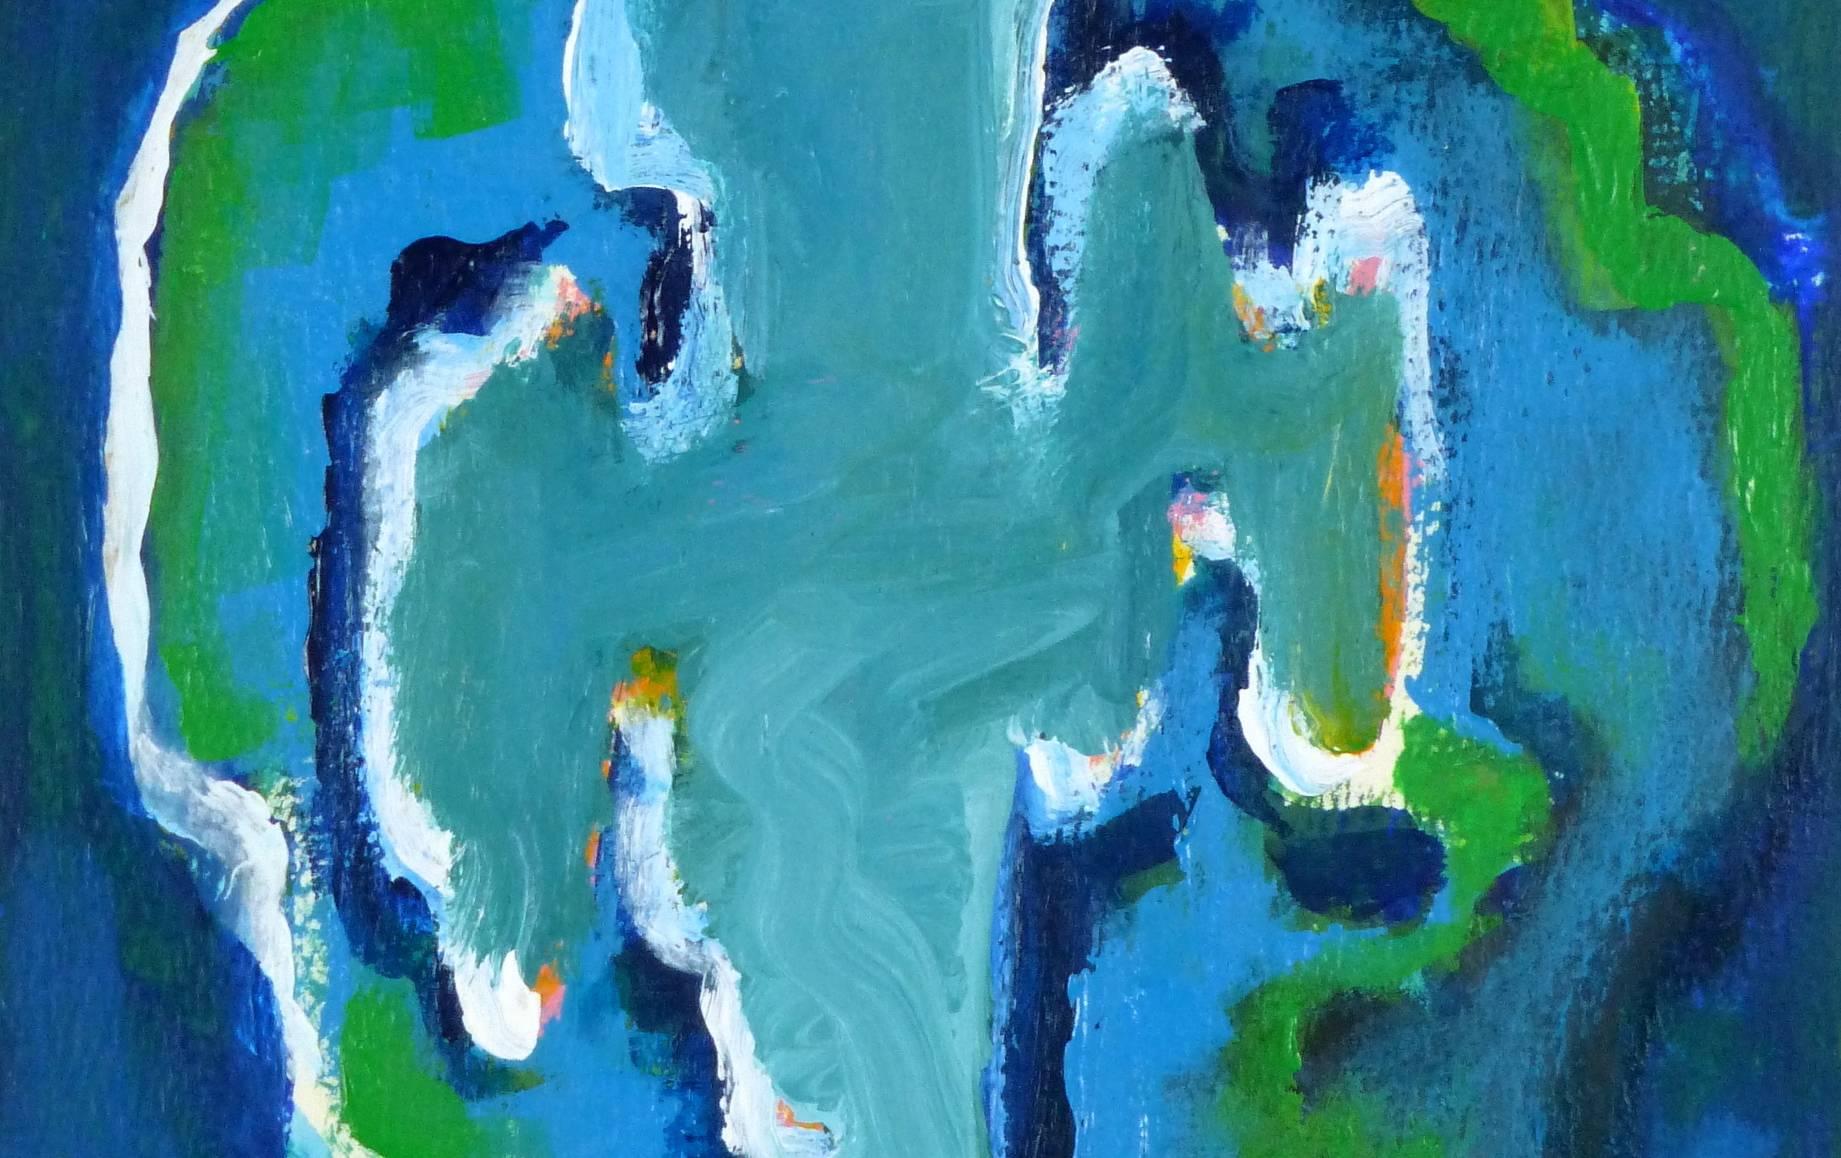 Fluid abstract painting in blue hues by French artist Pascal Boucher, circa 1980. 

Original one-of-a-kind vintage work of art on paper displayed on a white mat with a gold border and fits a standard-size frame. Archival plastic sleeve and